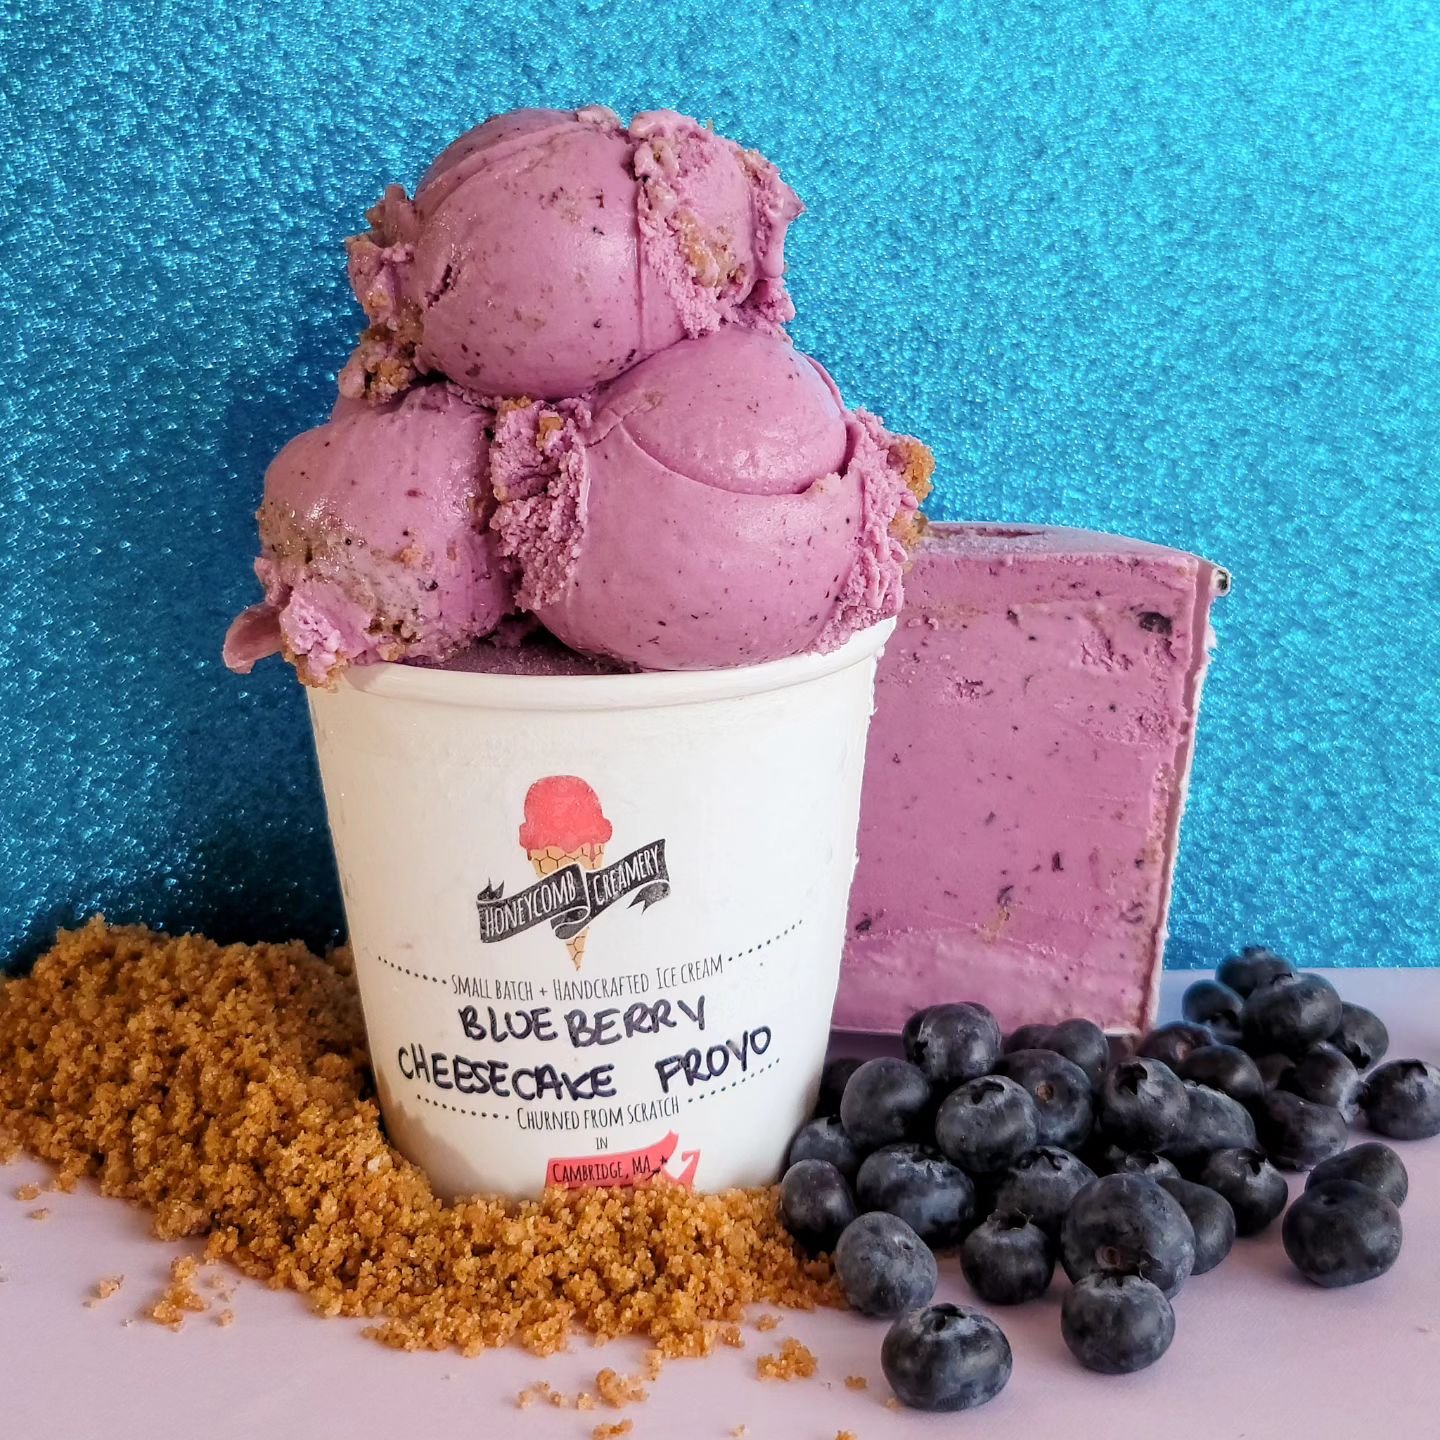 ⚠️NEW FLAVOR ALERT!⚠️

BLUEBERRY CHEESECAKE FROZEN YOGURT is a blueberry frozen yogurt (made with Greek yogurt) swirled with a buttery graham cracker crust crumble. Tangy and sweetness balanced with a gritty crunch to liven up the texture, this is on